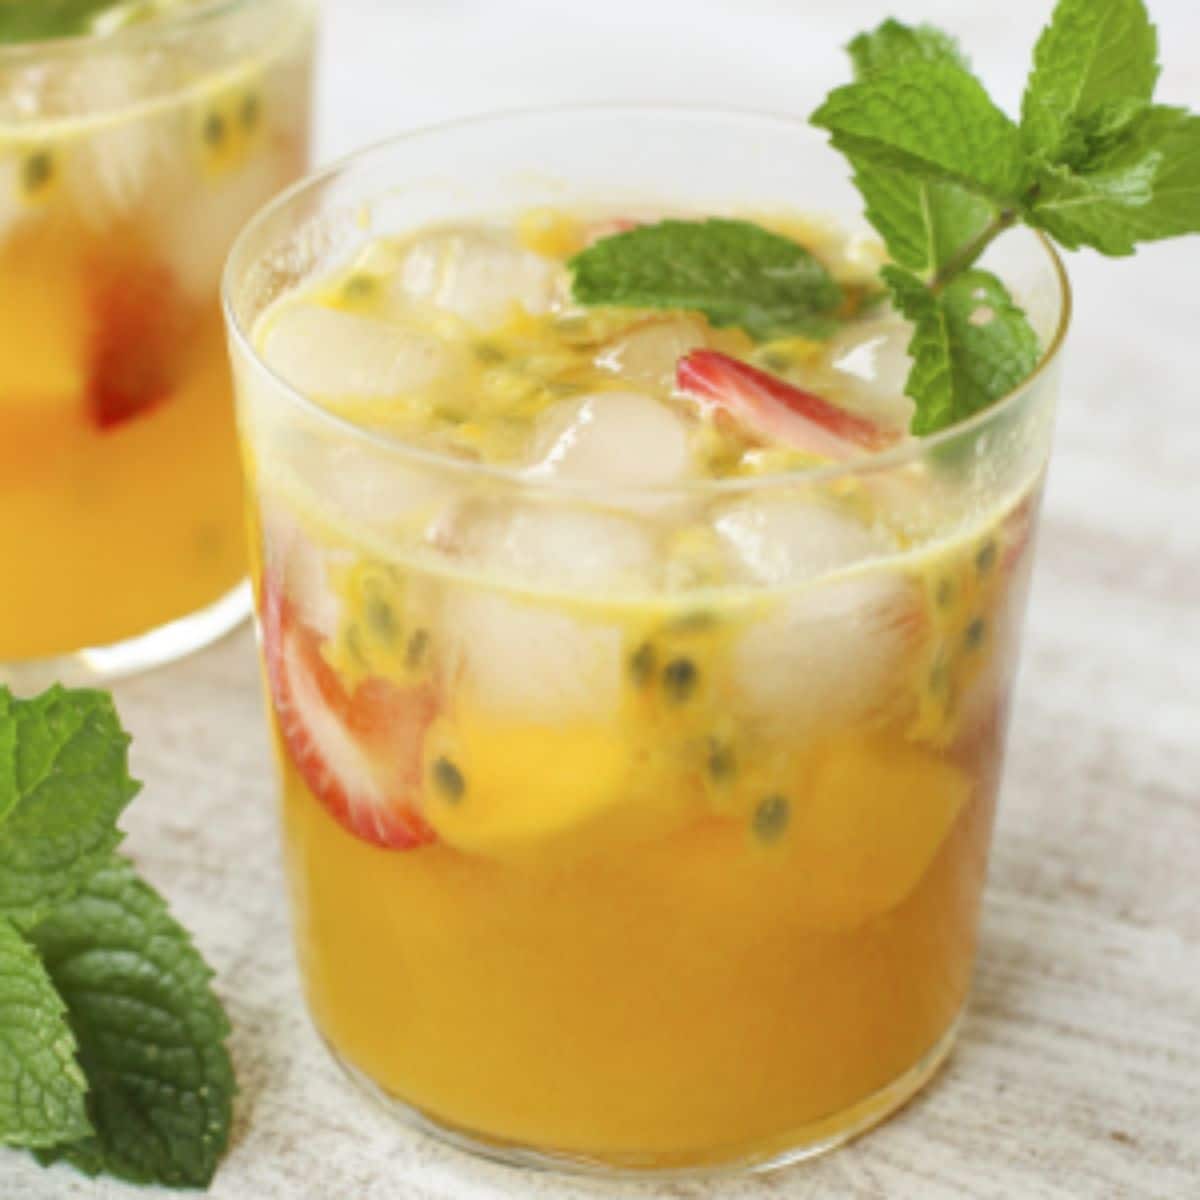 Delicious tropical sangria with passion fruit in a glass cup.